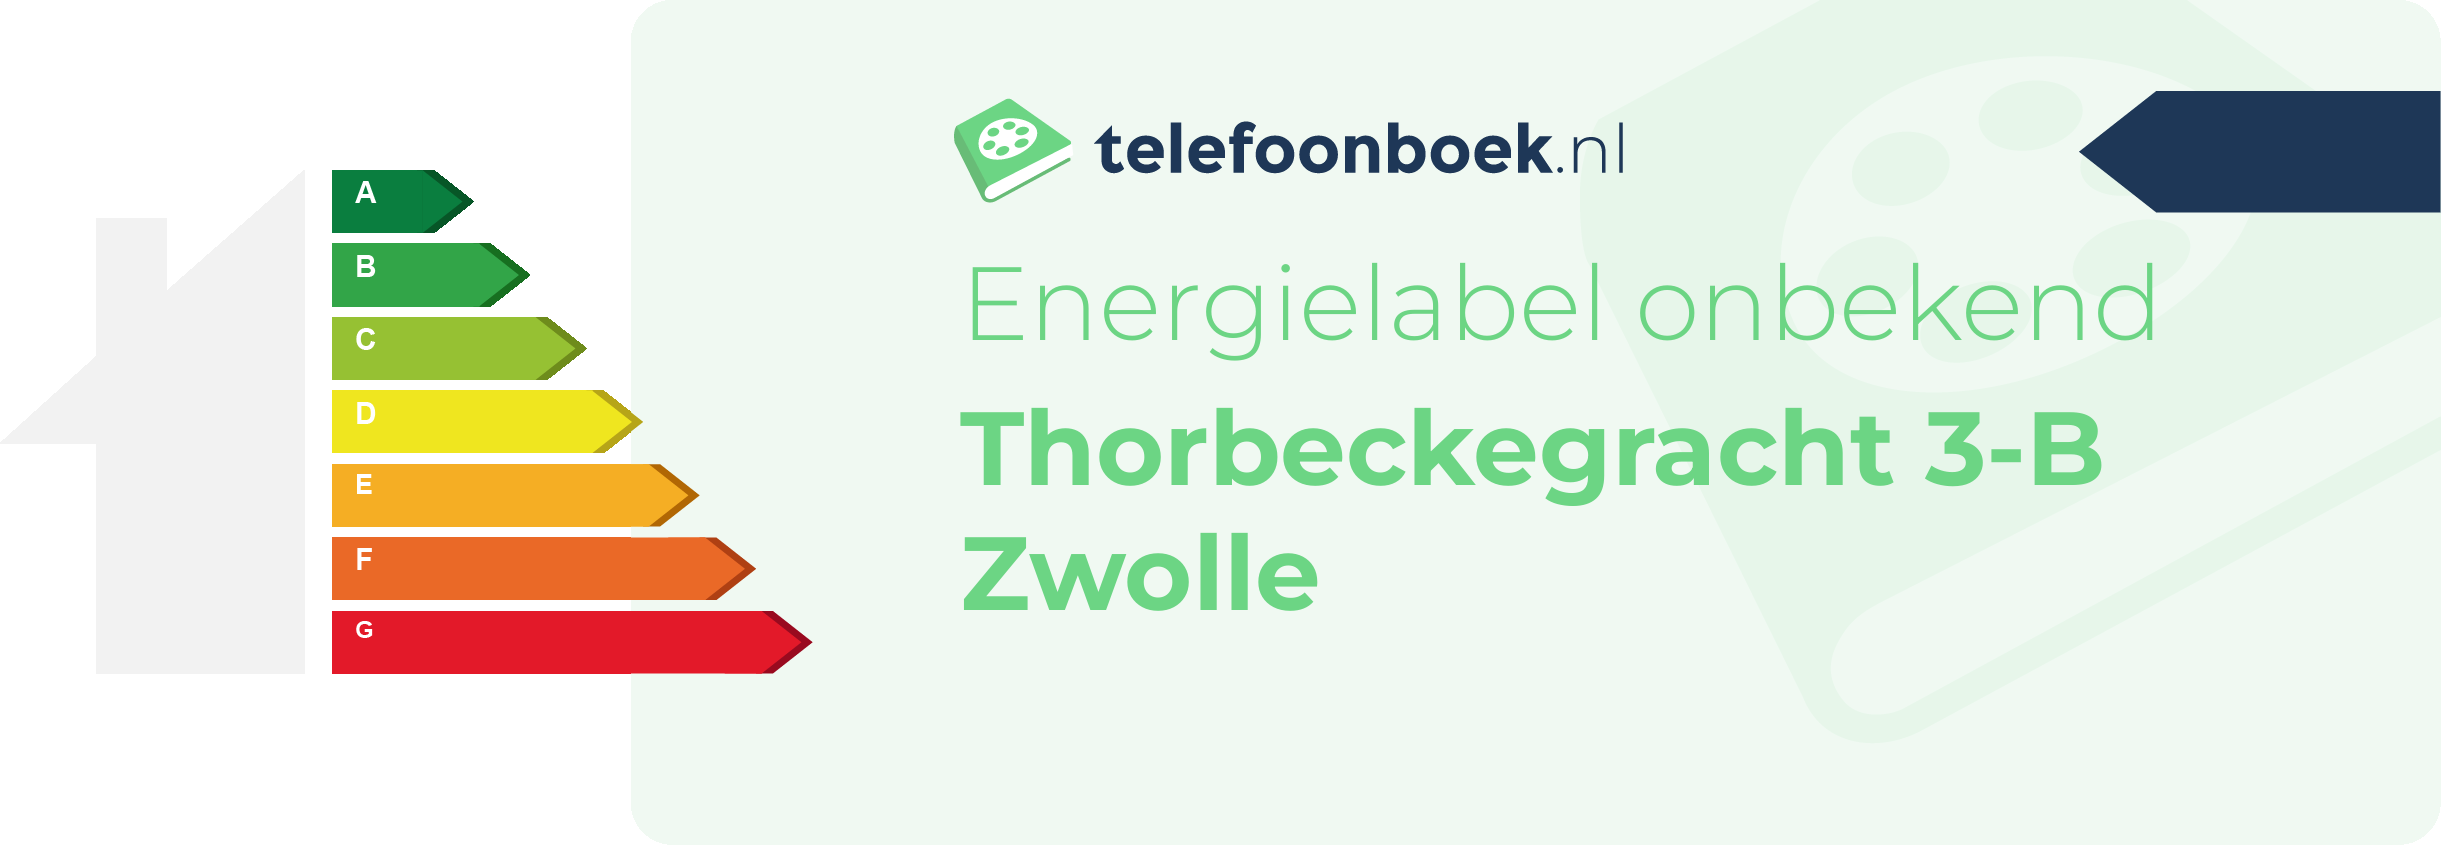 Energielabel Thorbeckegracht 3-B Zwolle